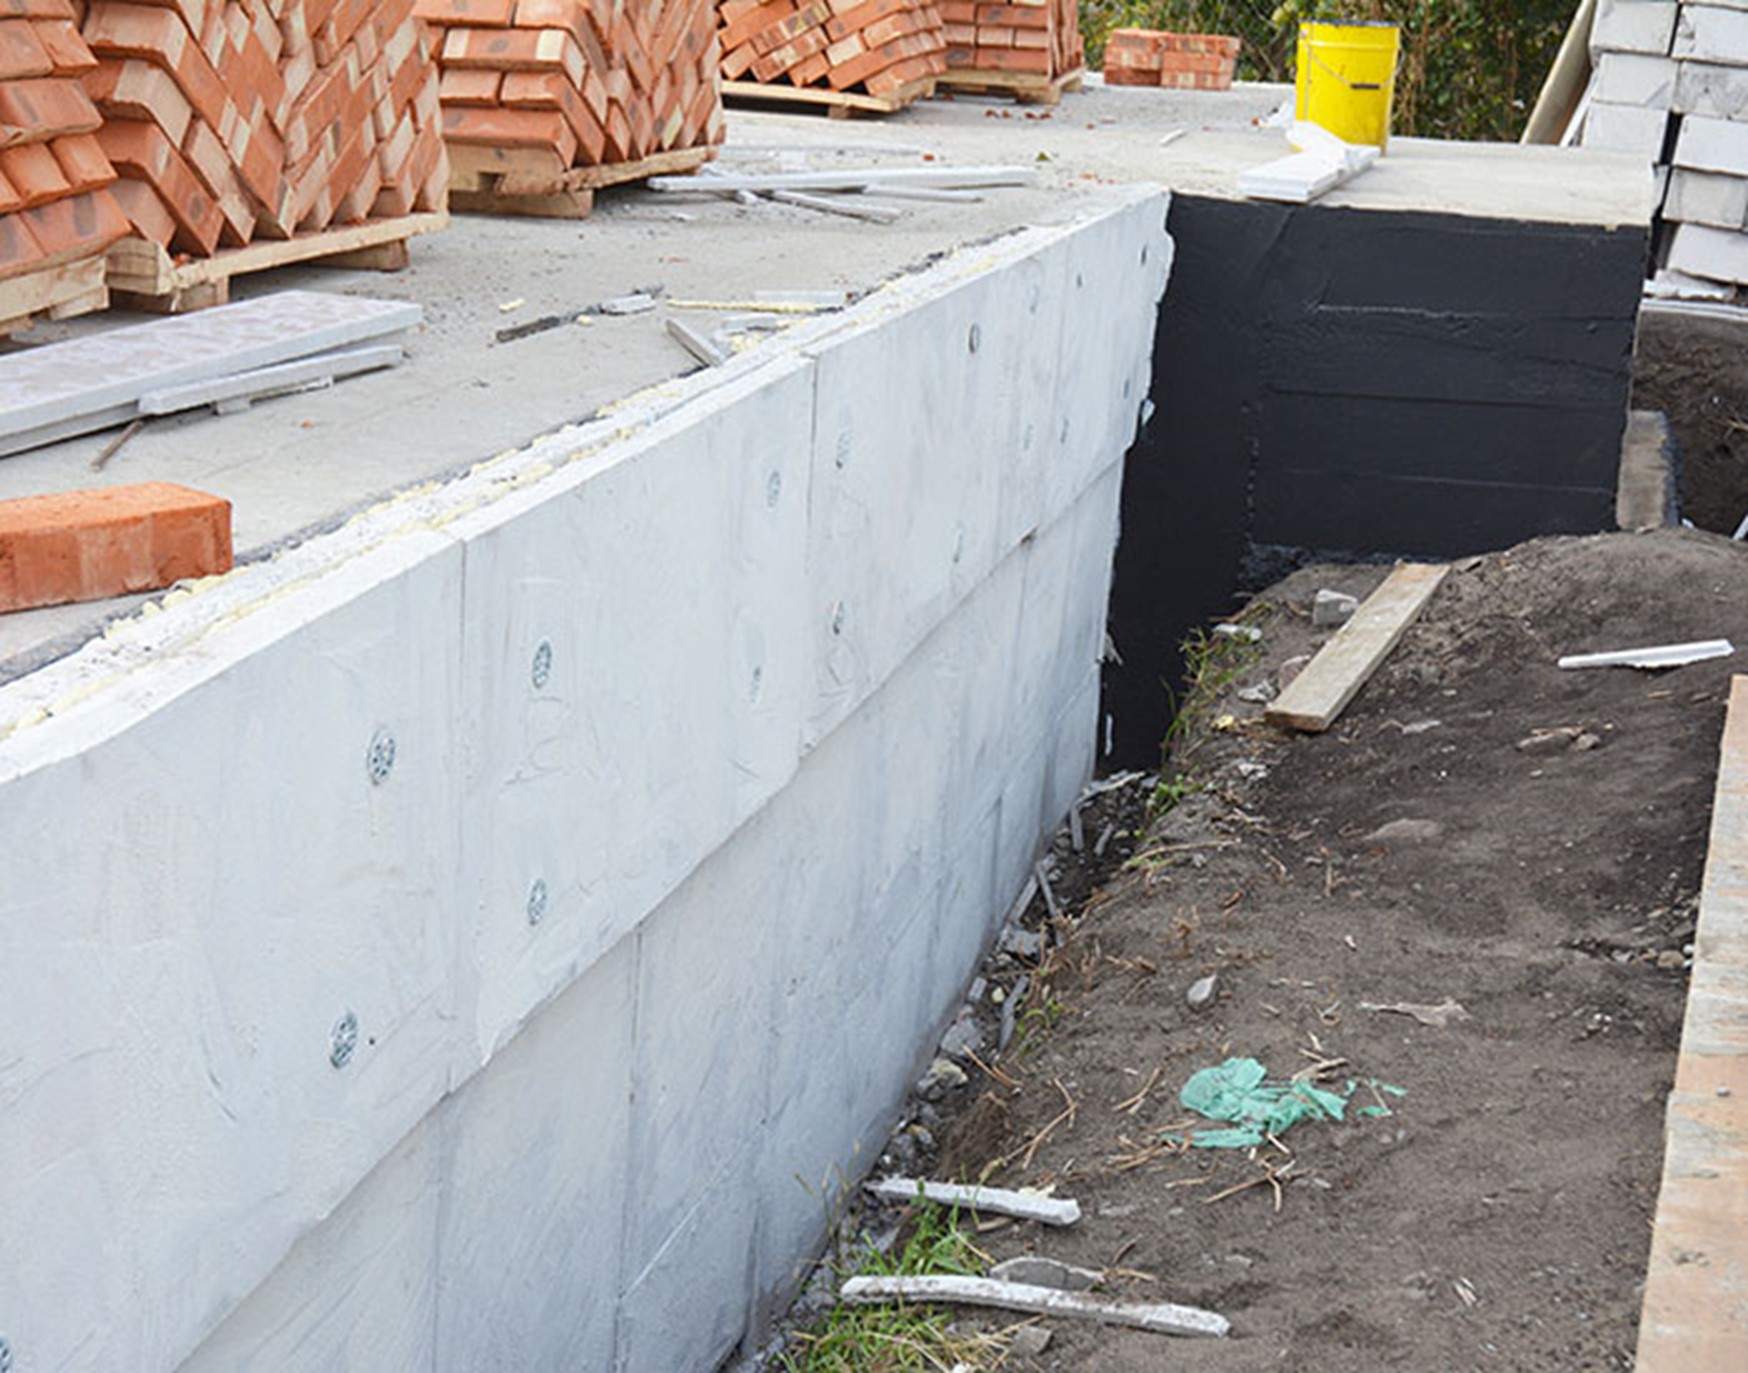 Coating being applied to the foundation of a home to provide basement waterproofing